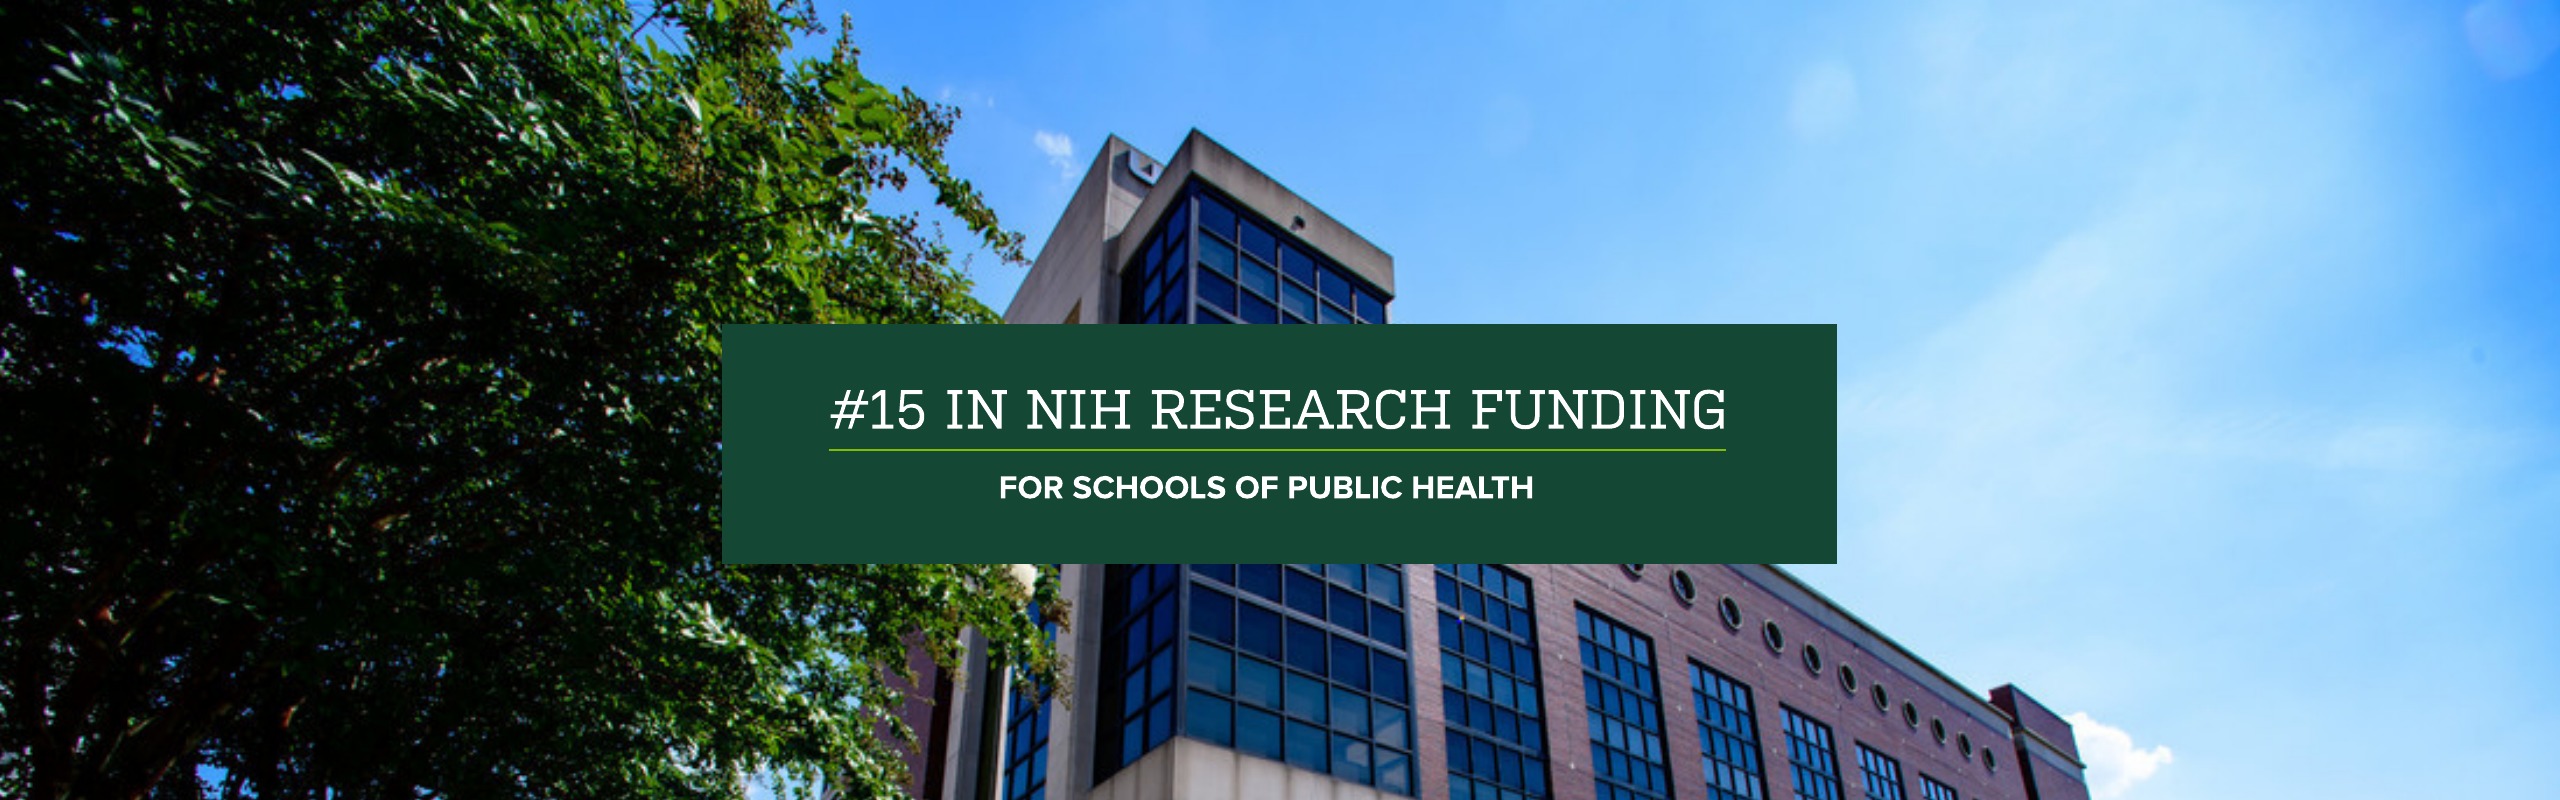 #15 in NIH research funding for schools of public health